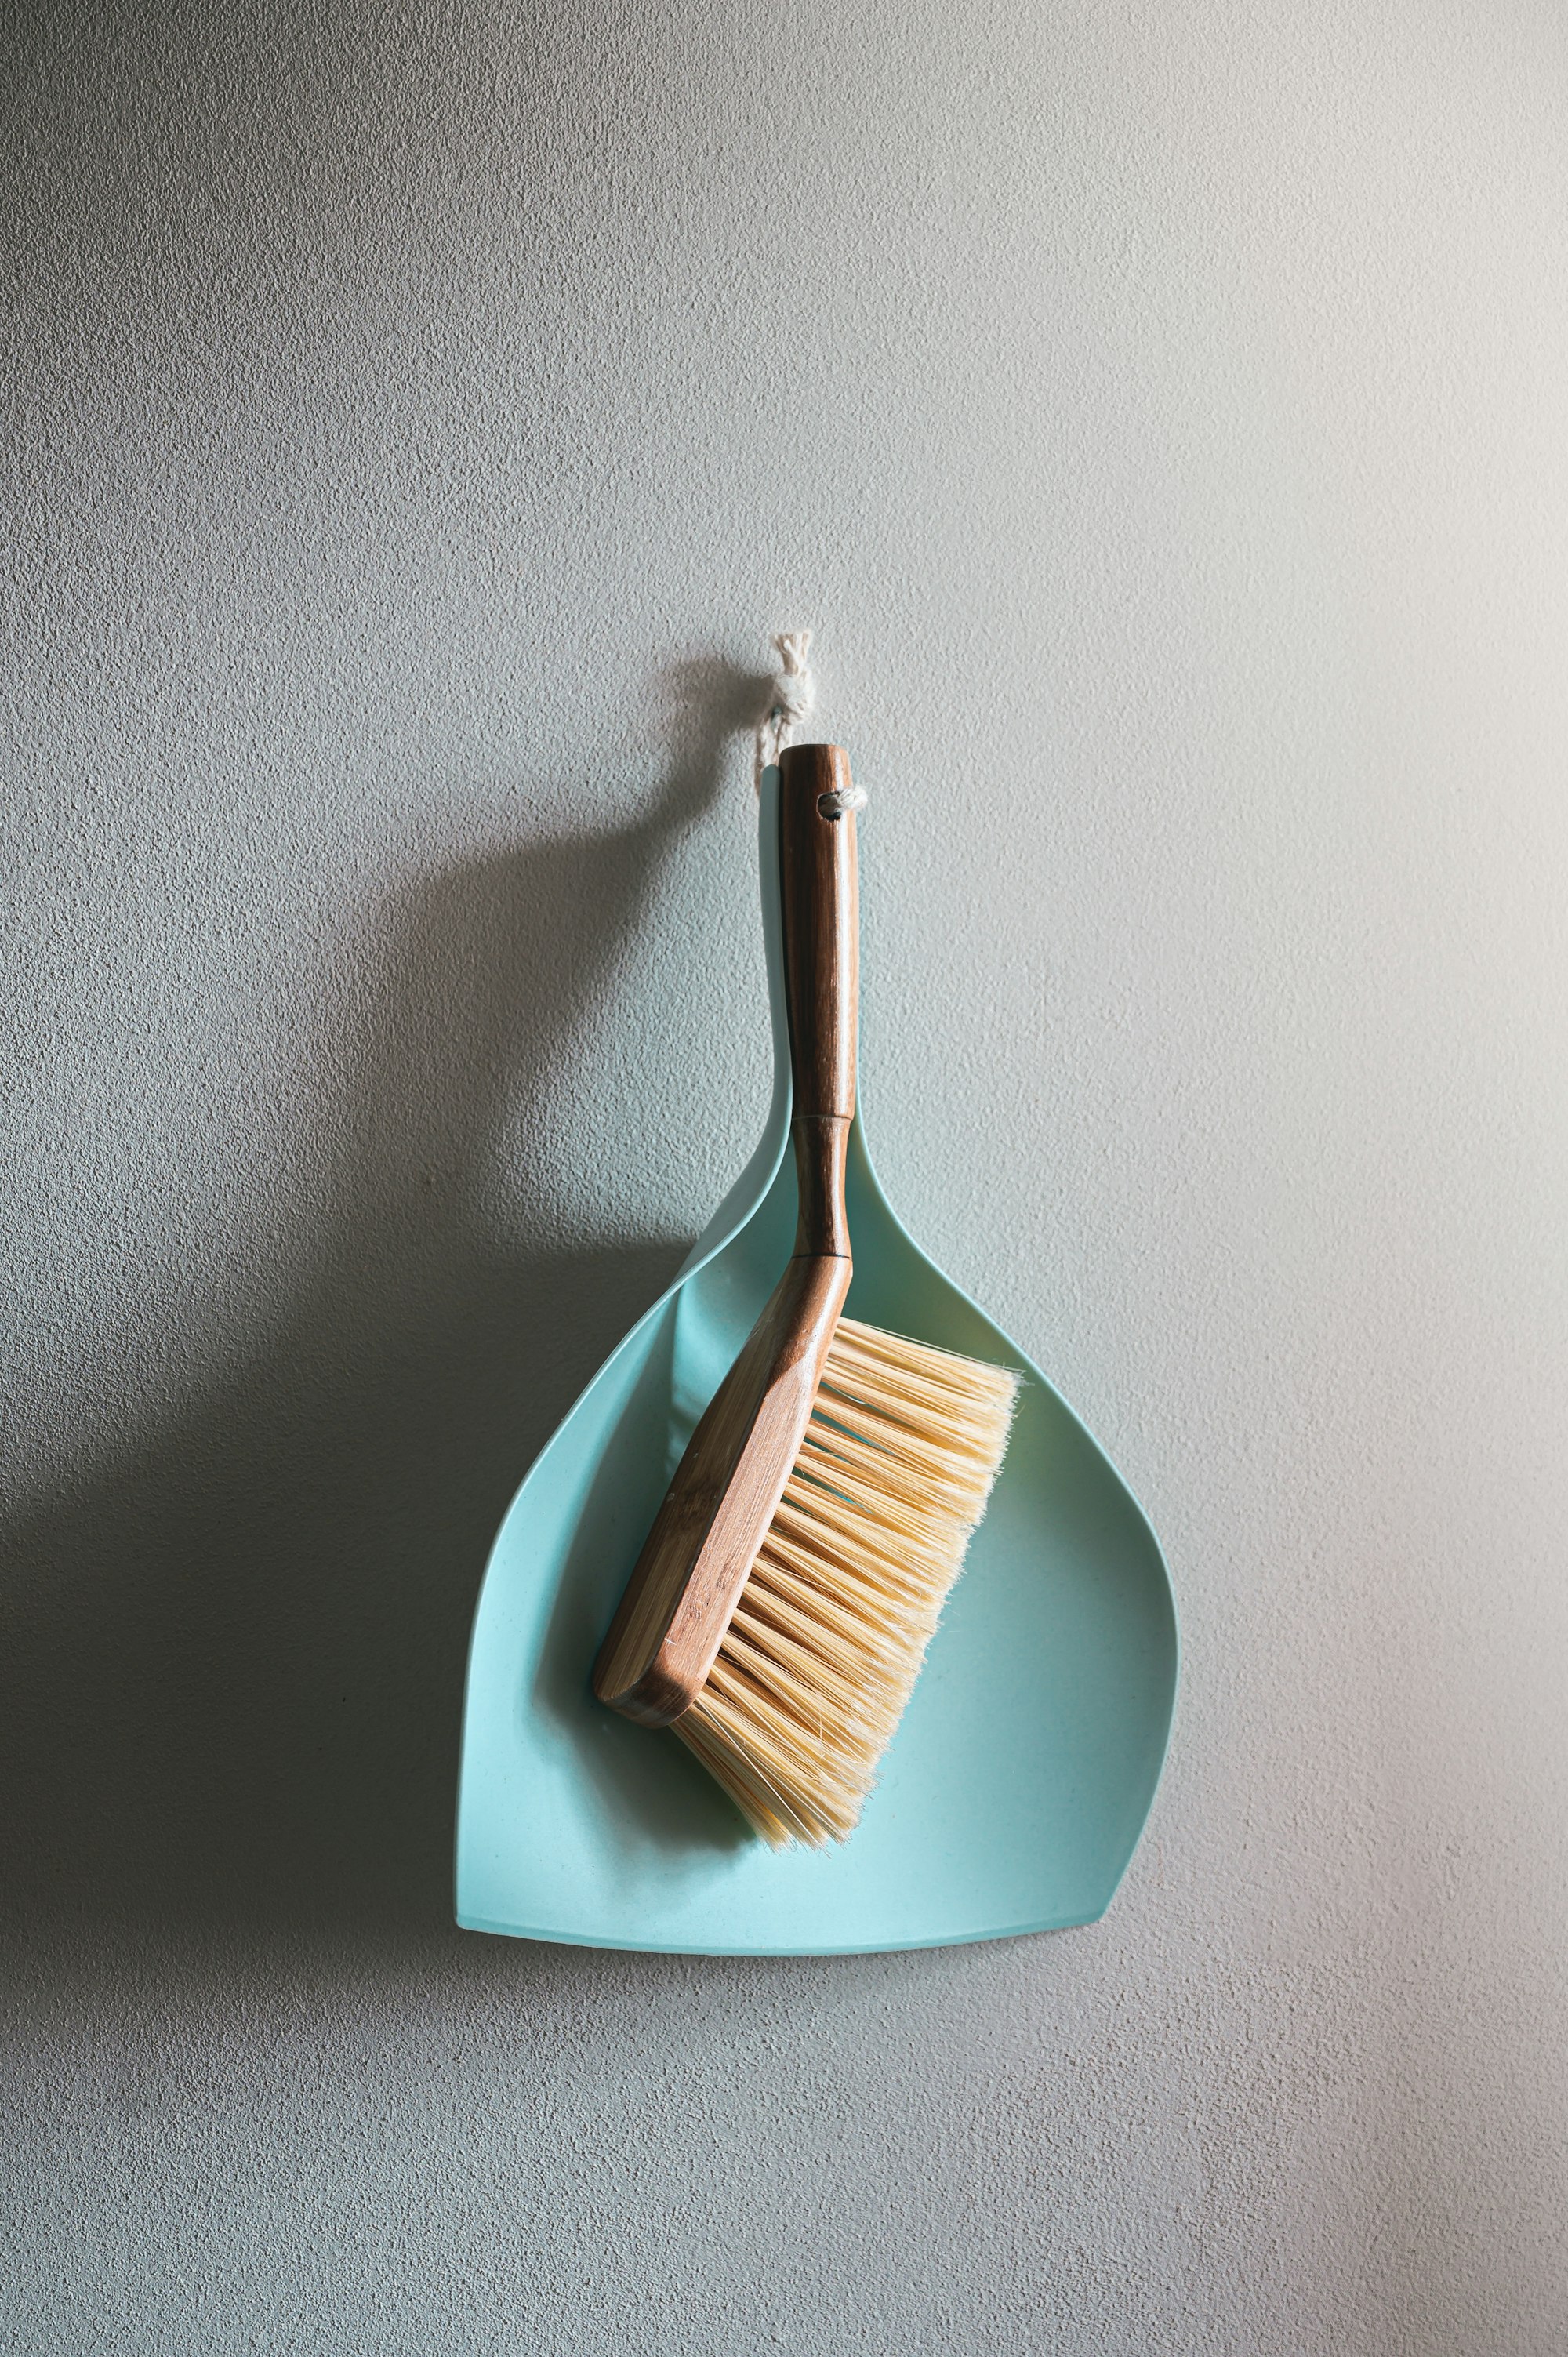 design Broom and paddle for clean home